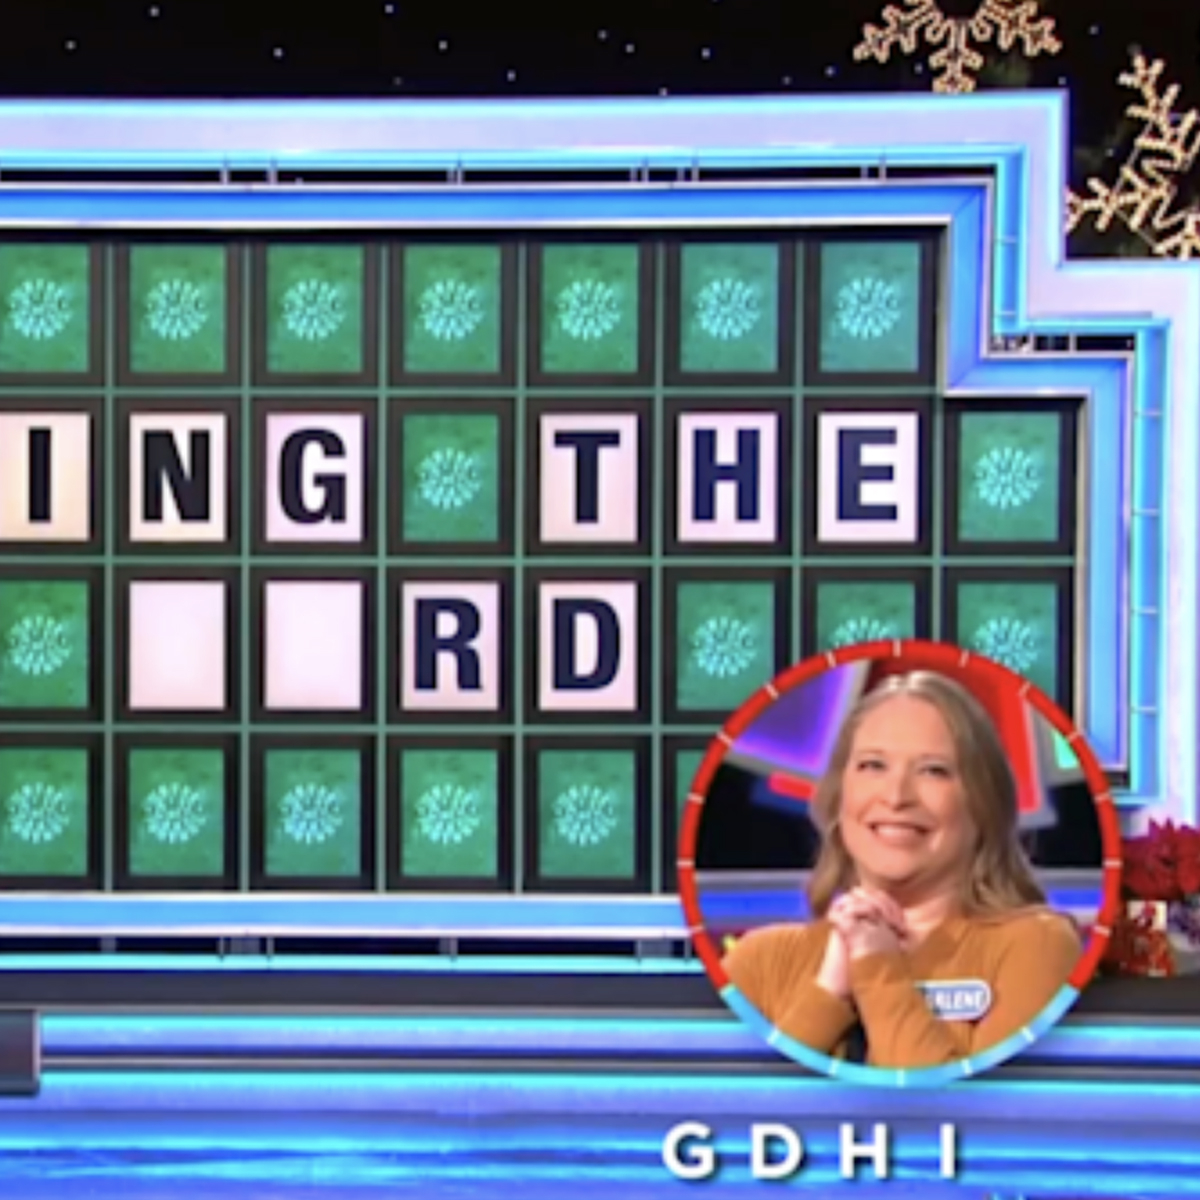 audi-to-give-wheel-of-fortune-player-a-car-after-big-show-loss-e-online